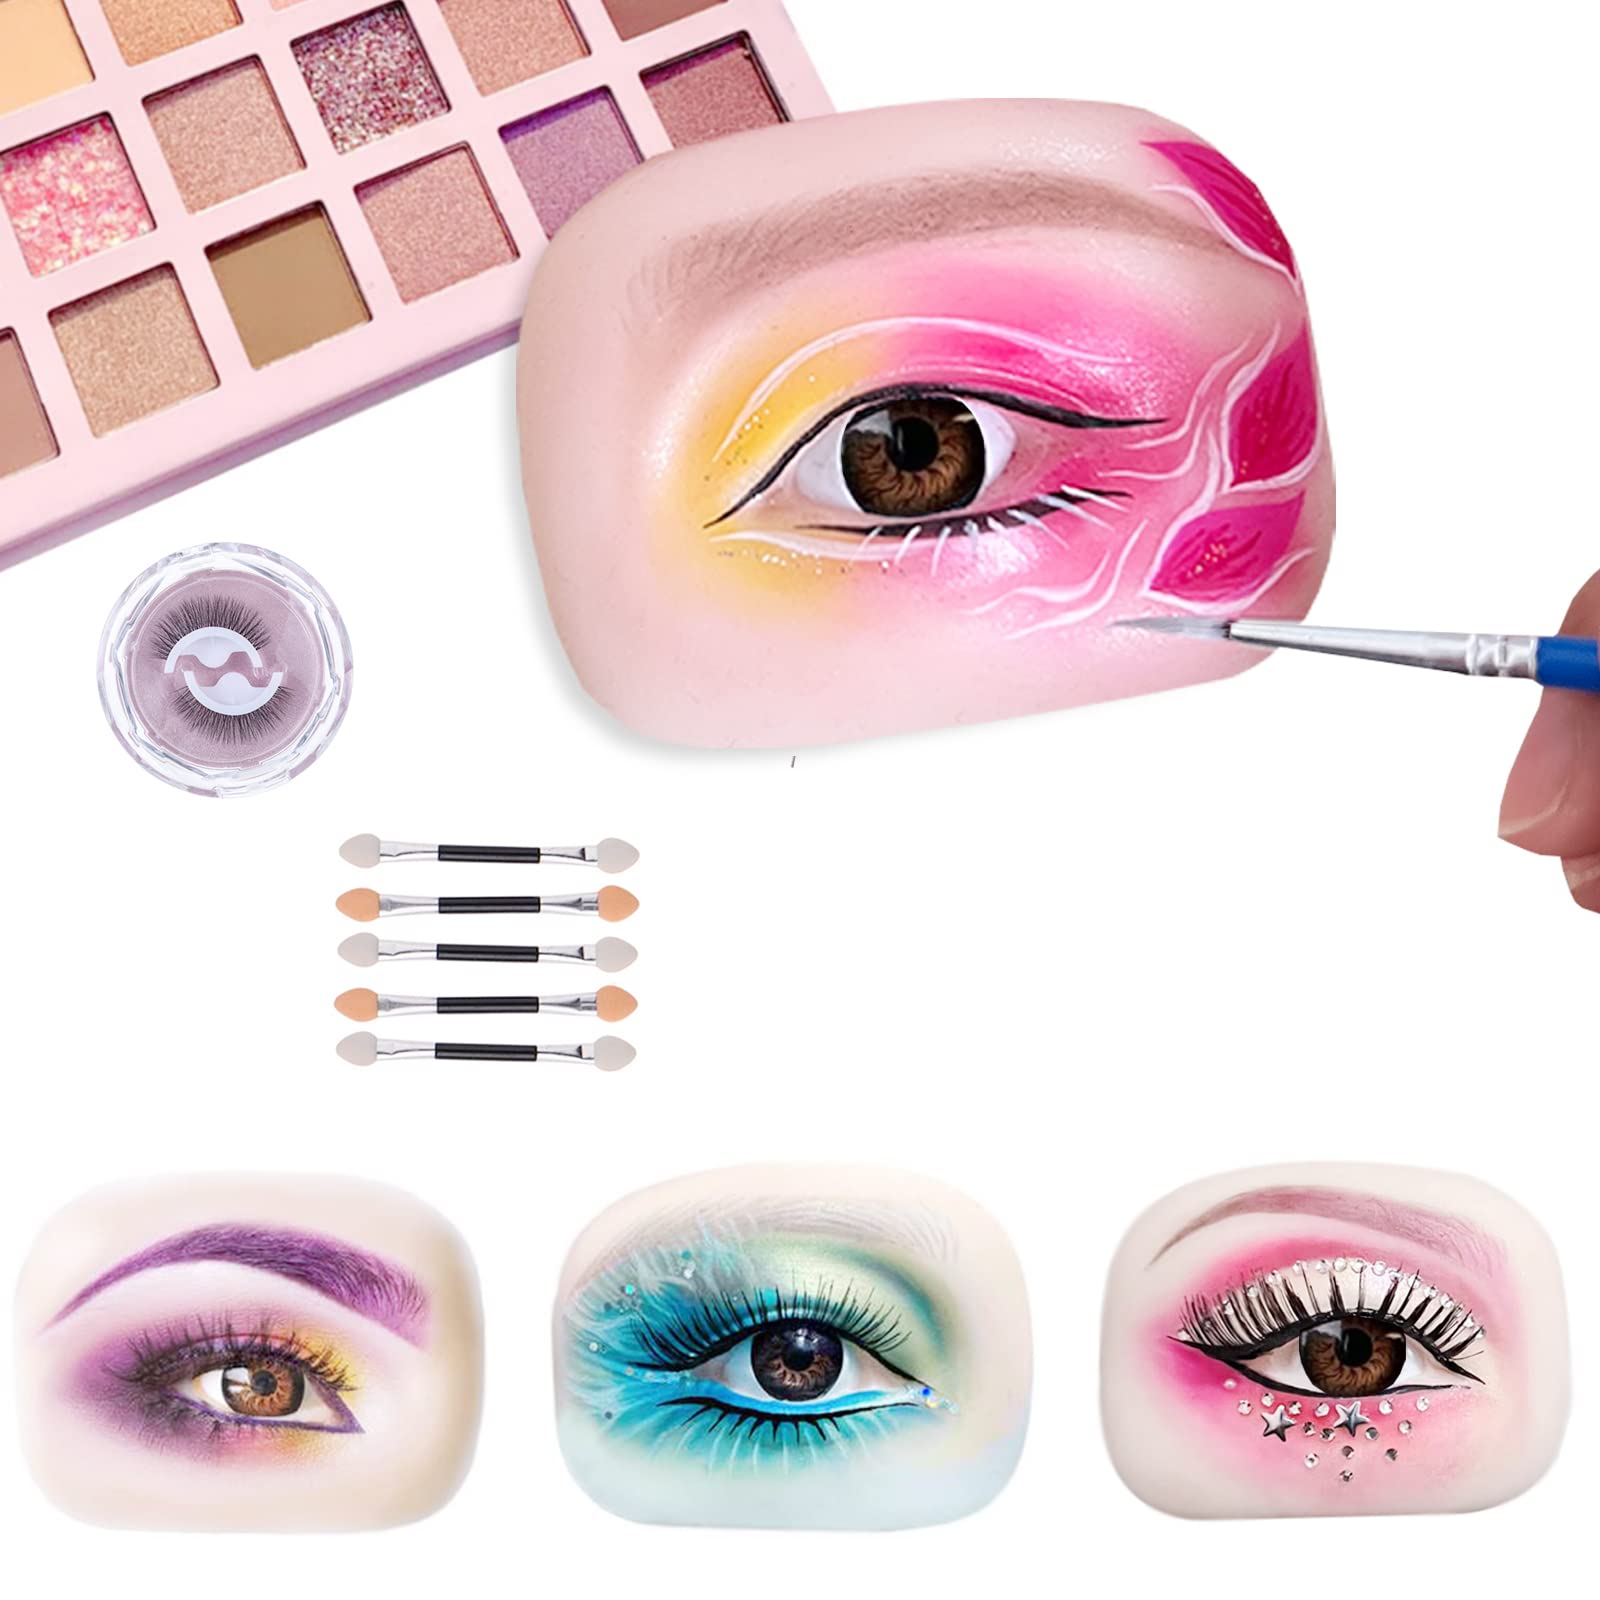 Store In America 5D Silicone Makeup Practice Face Board With False Lash  Case Brushes Sponge Magnetic Eyelashes With Eyeliner For Makeup Artists  Students And Beginners To Practice Makeup From Misssecret, $33.3